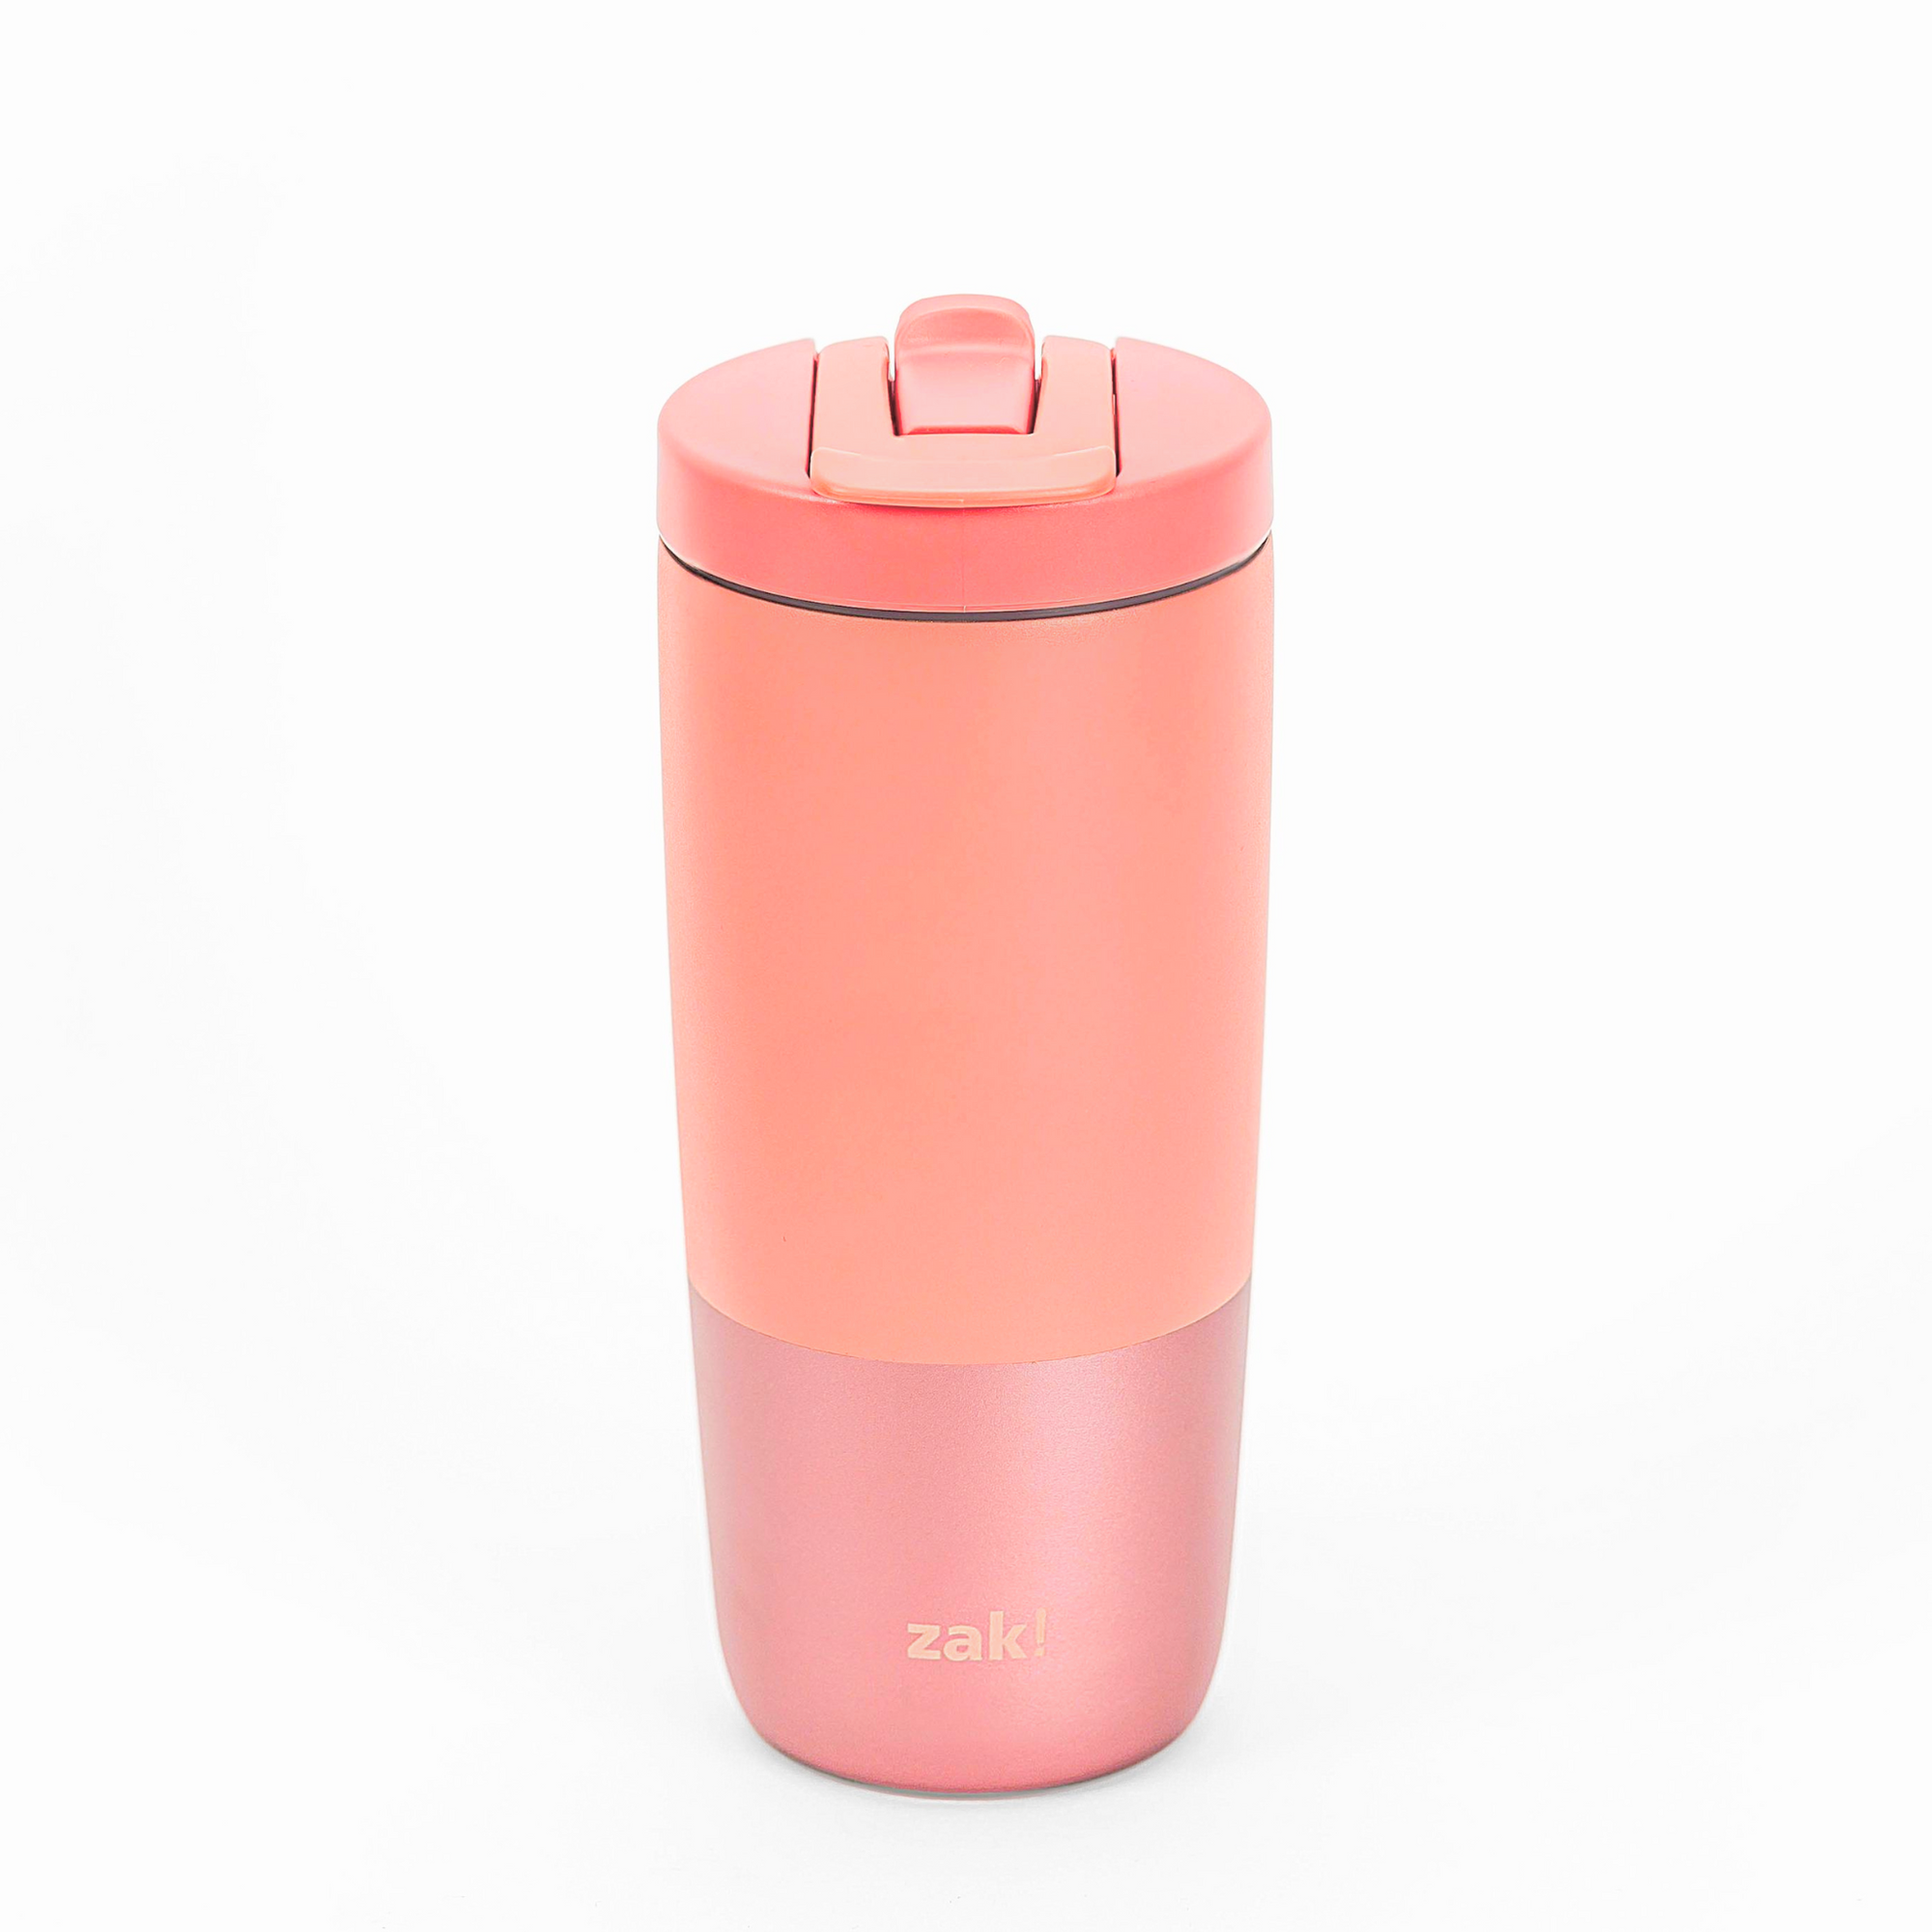 Sutton Insulated Stainless Steel Tumbler with 2-in-1 Straw and Sip Lid - Coral Blush, 20 Ounces